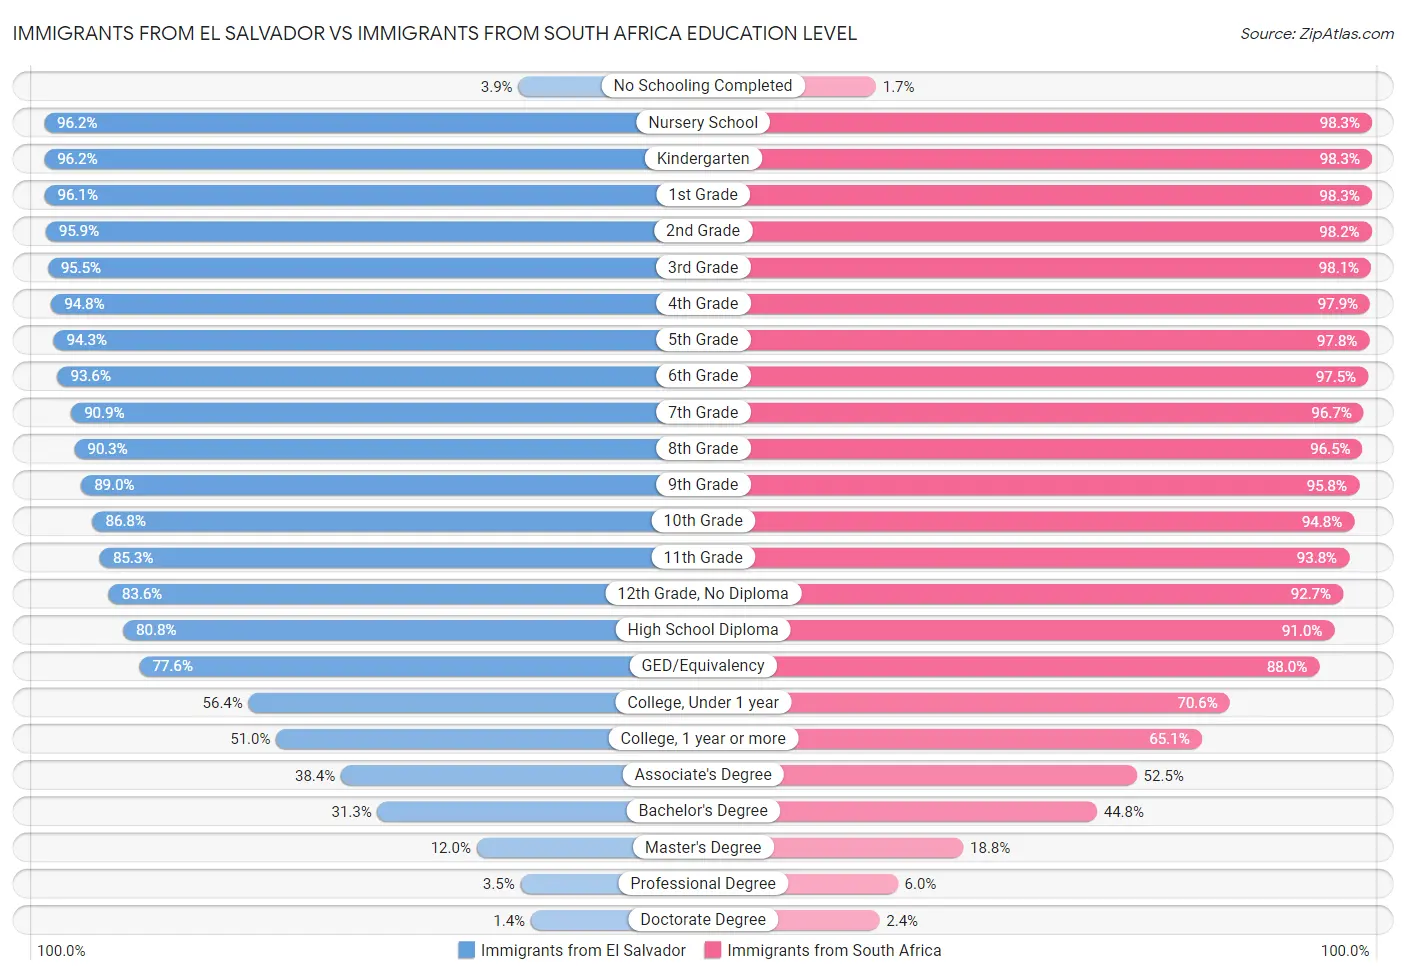 Immigrants from El Salvador vs Immigrants from South Africa Education Level